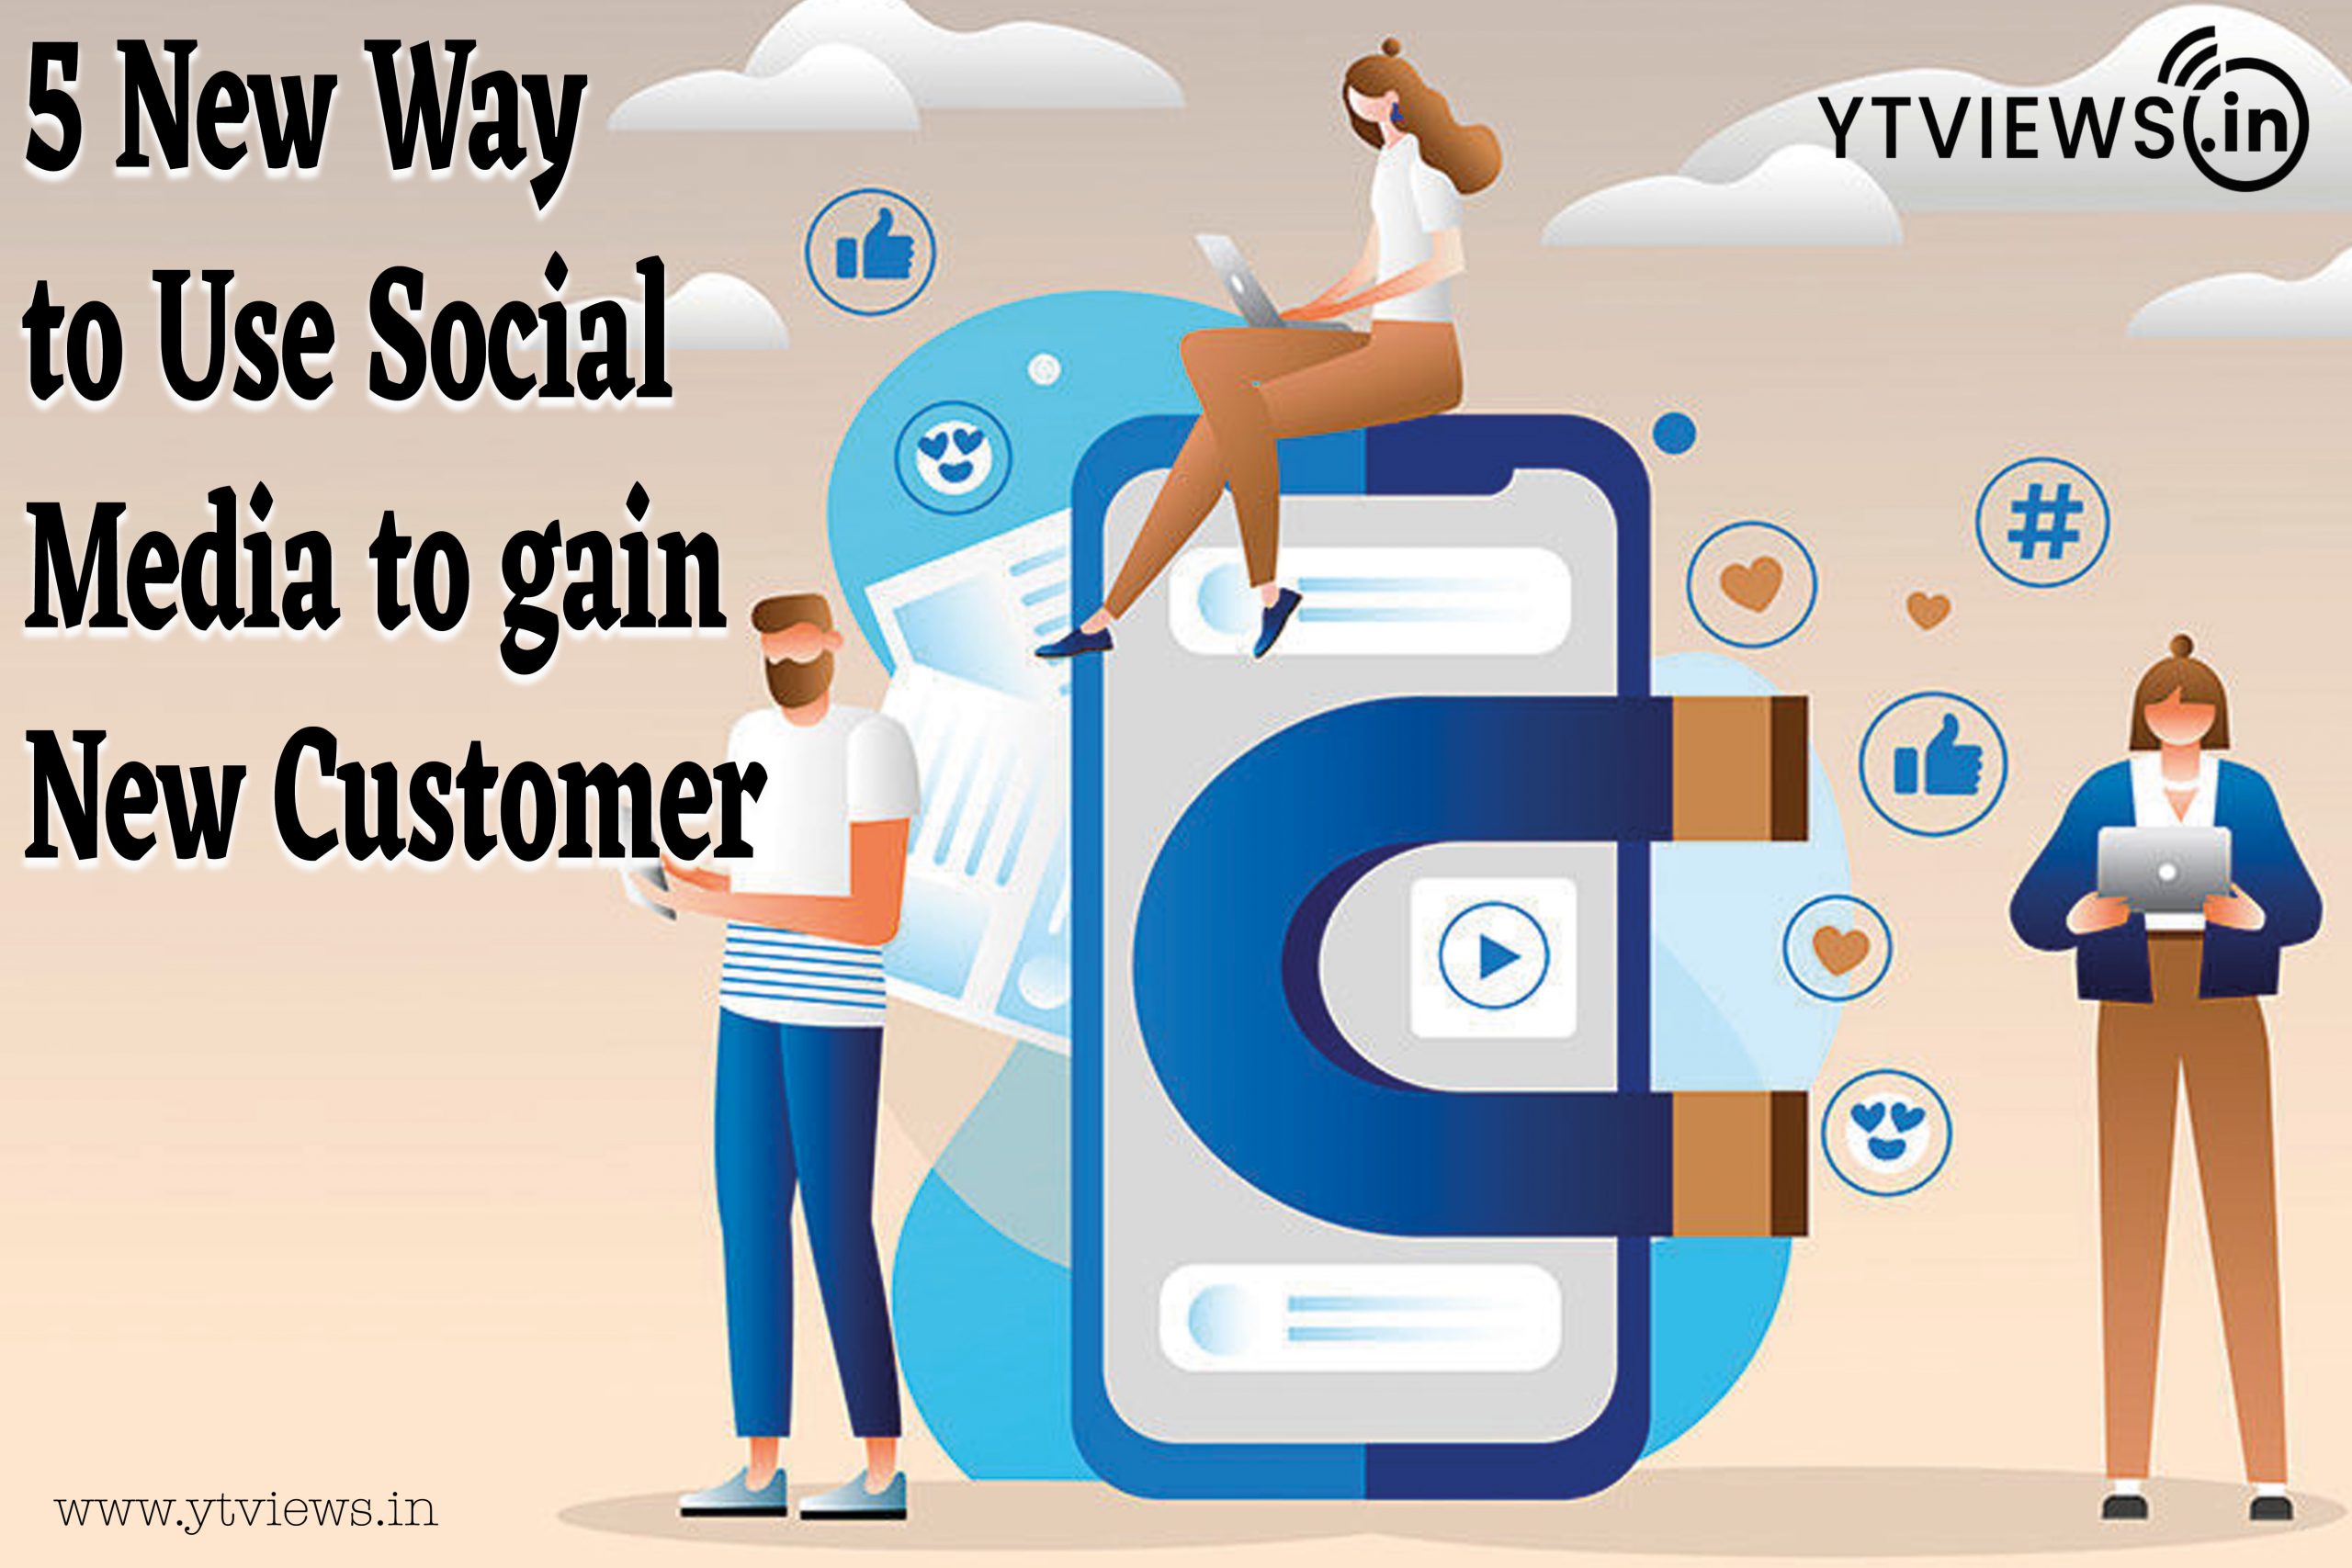 5 new ways to use social media to gain new consumers